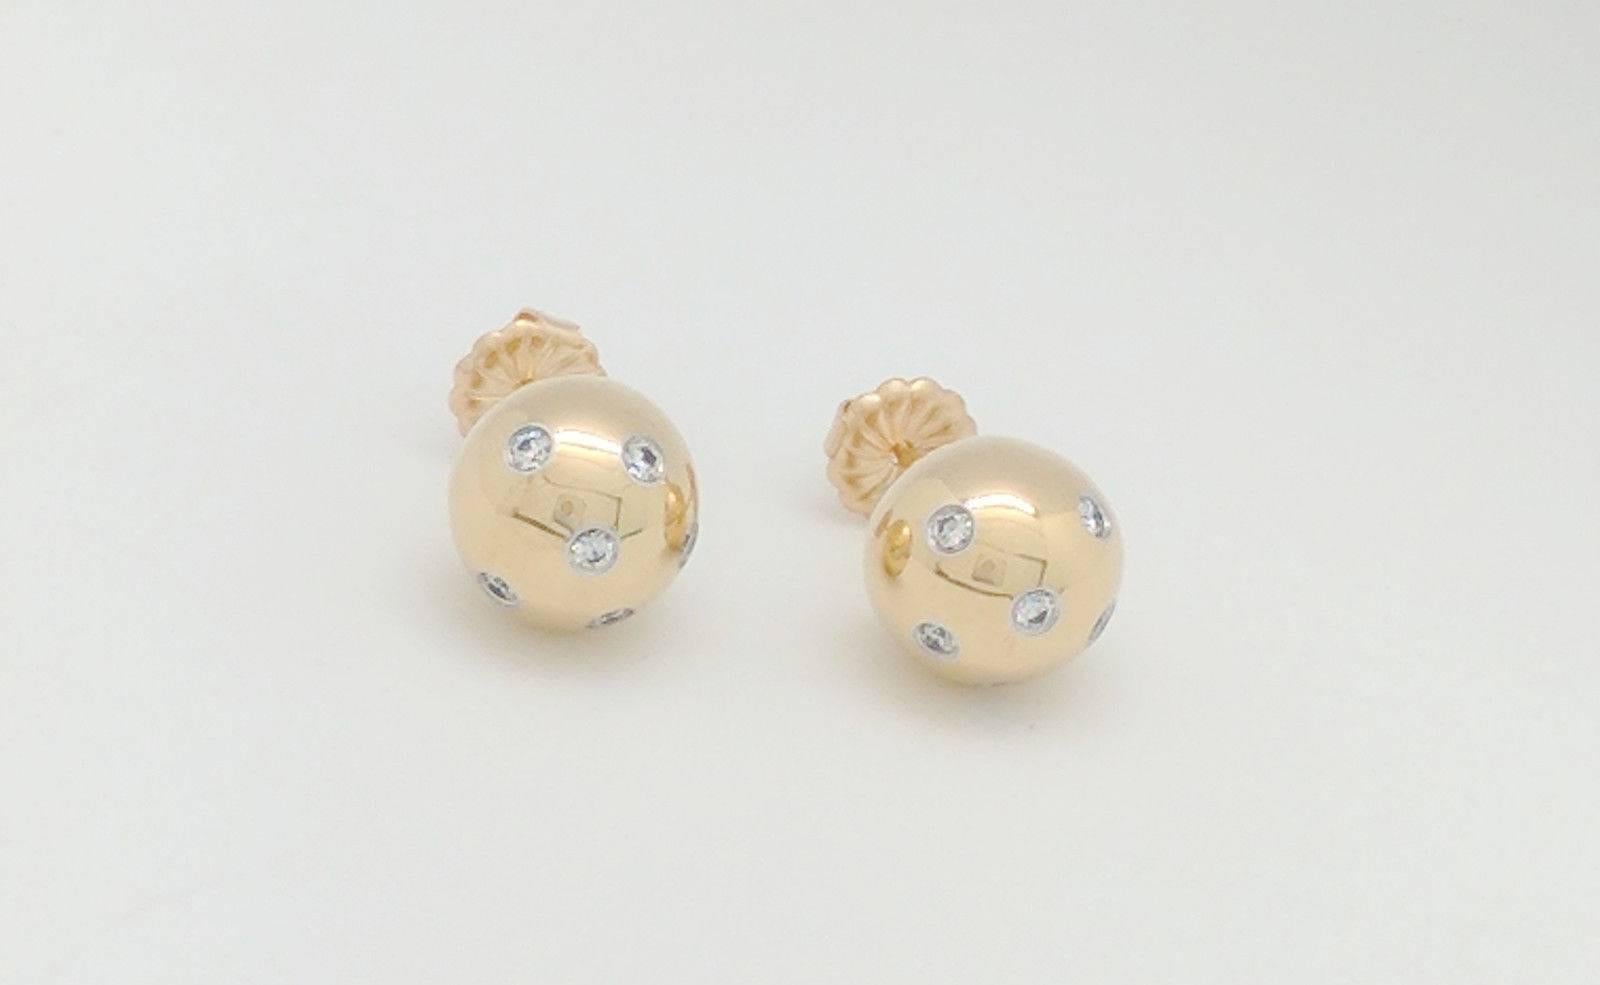 You are viewing a set of authentic Tiffany & Co. .25ctw diamond ball stud earrings from the Etoile Collection.
The earrings are crafted from 18k yellow gold and platinum and weigh 8.9 grams. Each earring features (6) .02ct natural round bezel